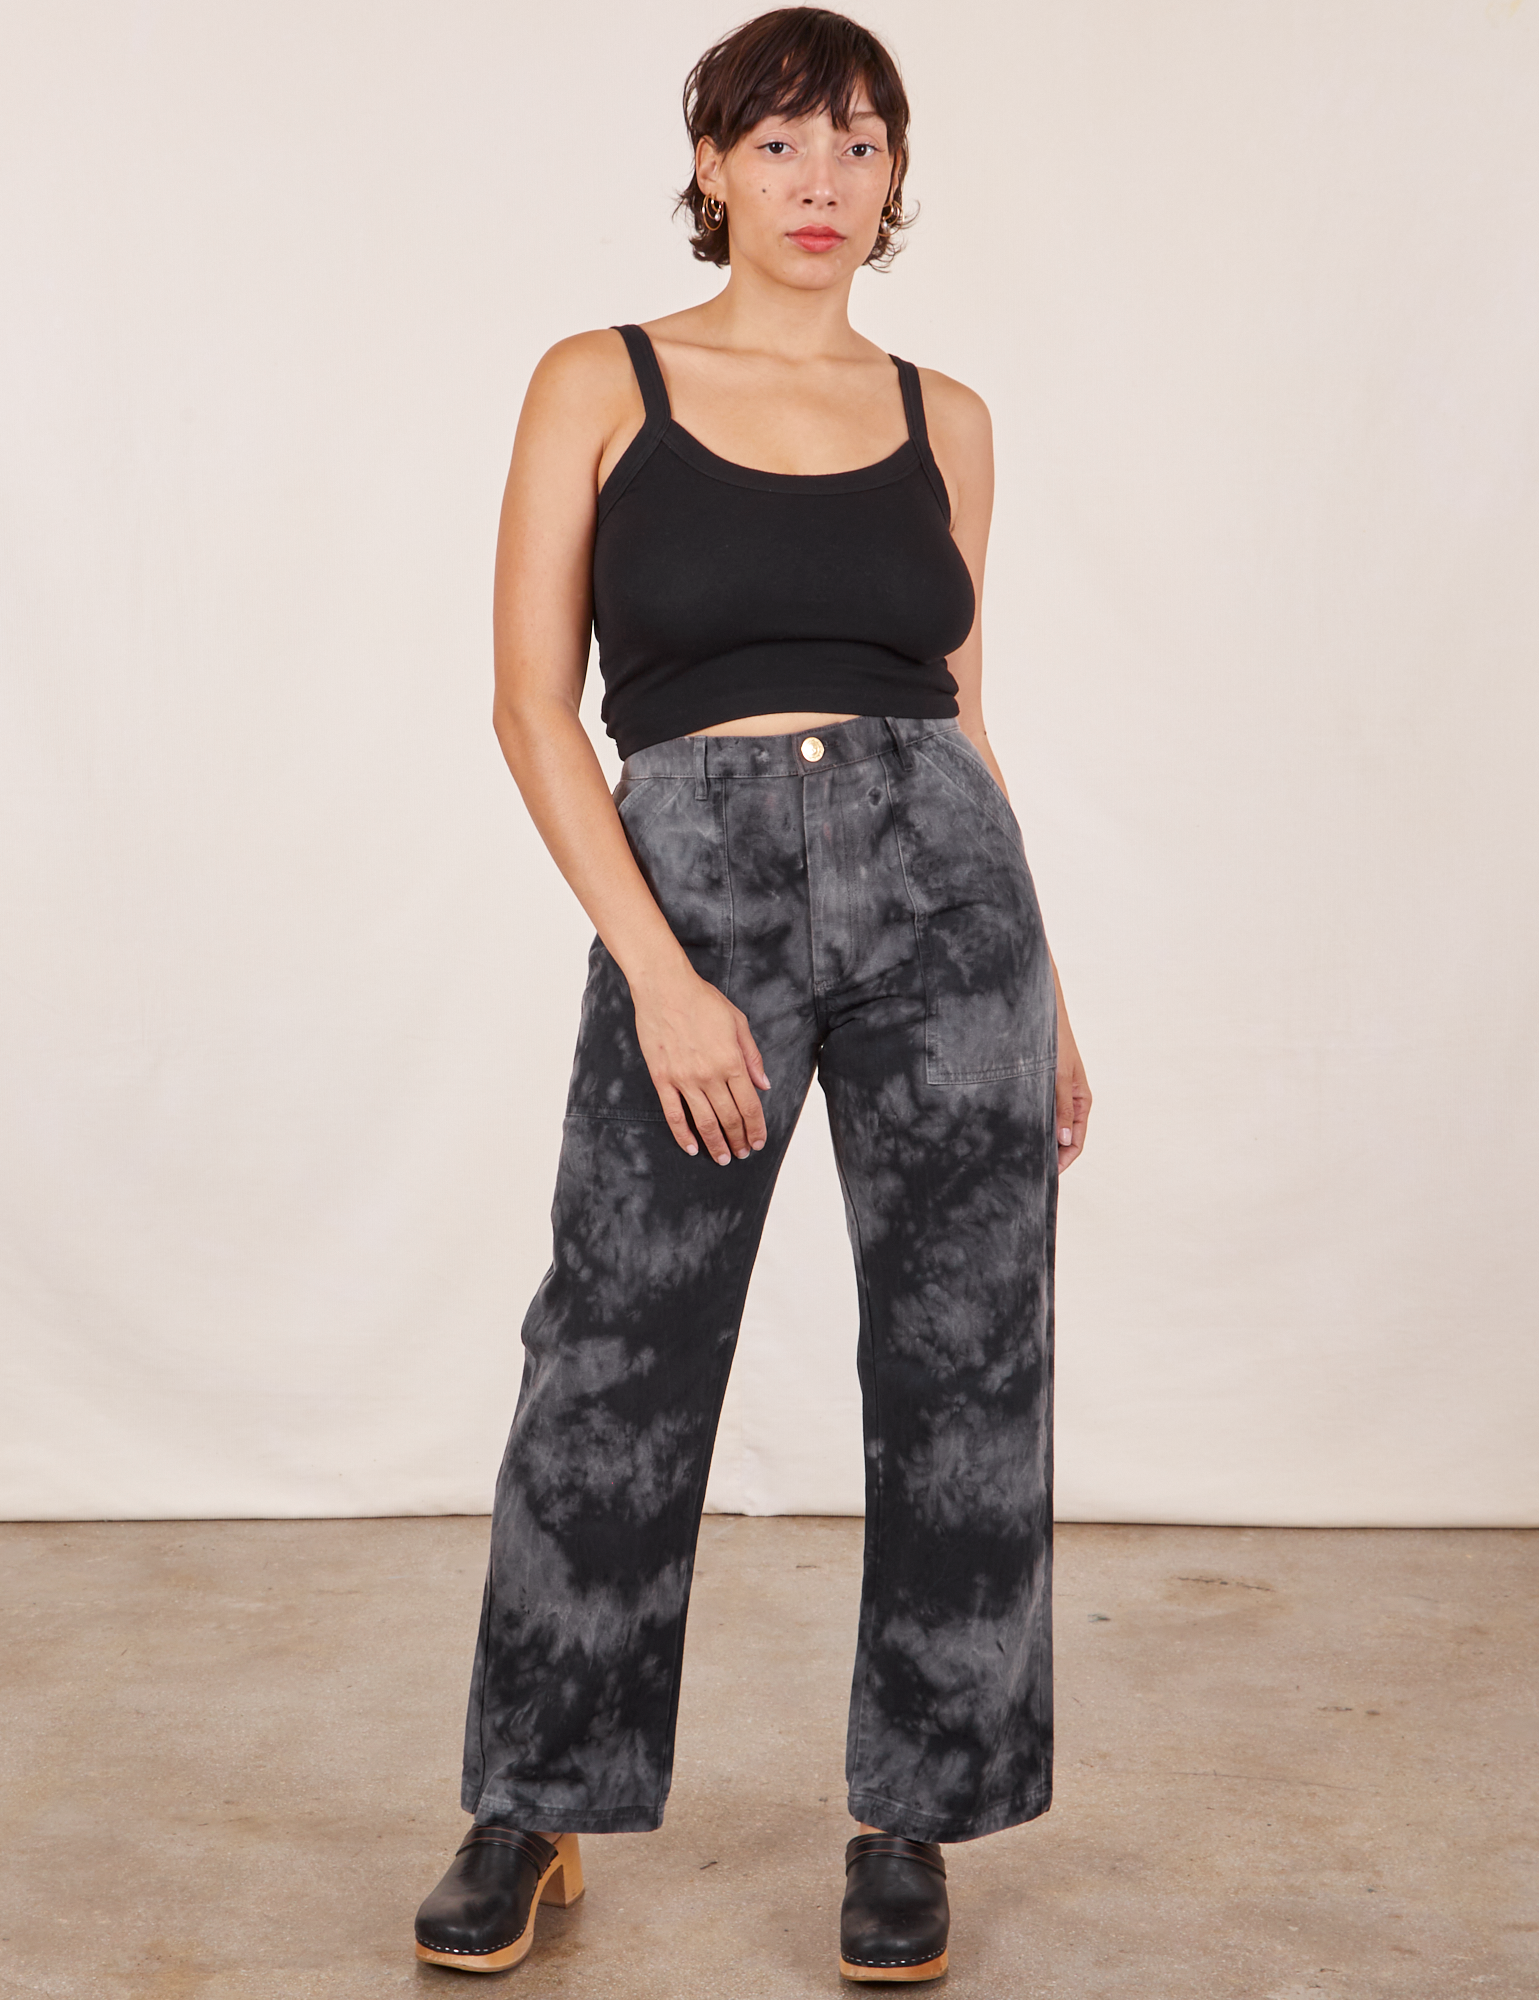 Tiara is 5&#39;4&quot; and wearing S Black Magic Waters Work Pants paired with black Cropped Cami